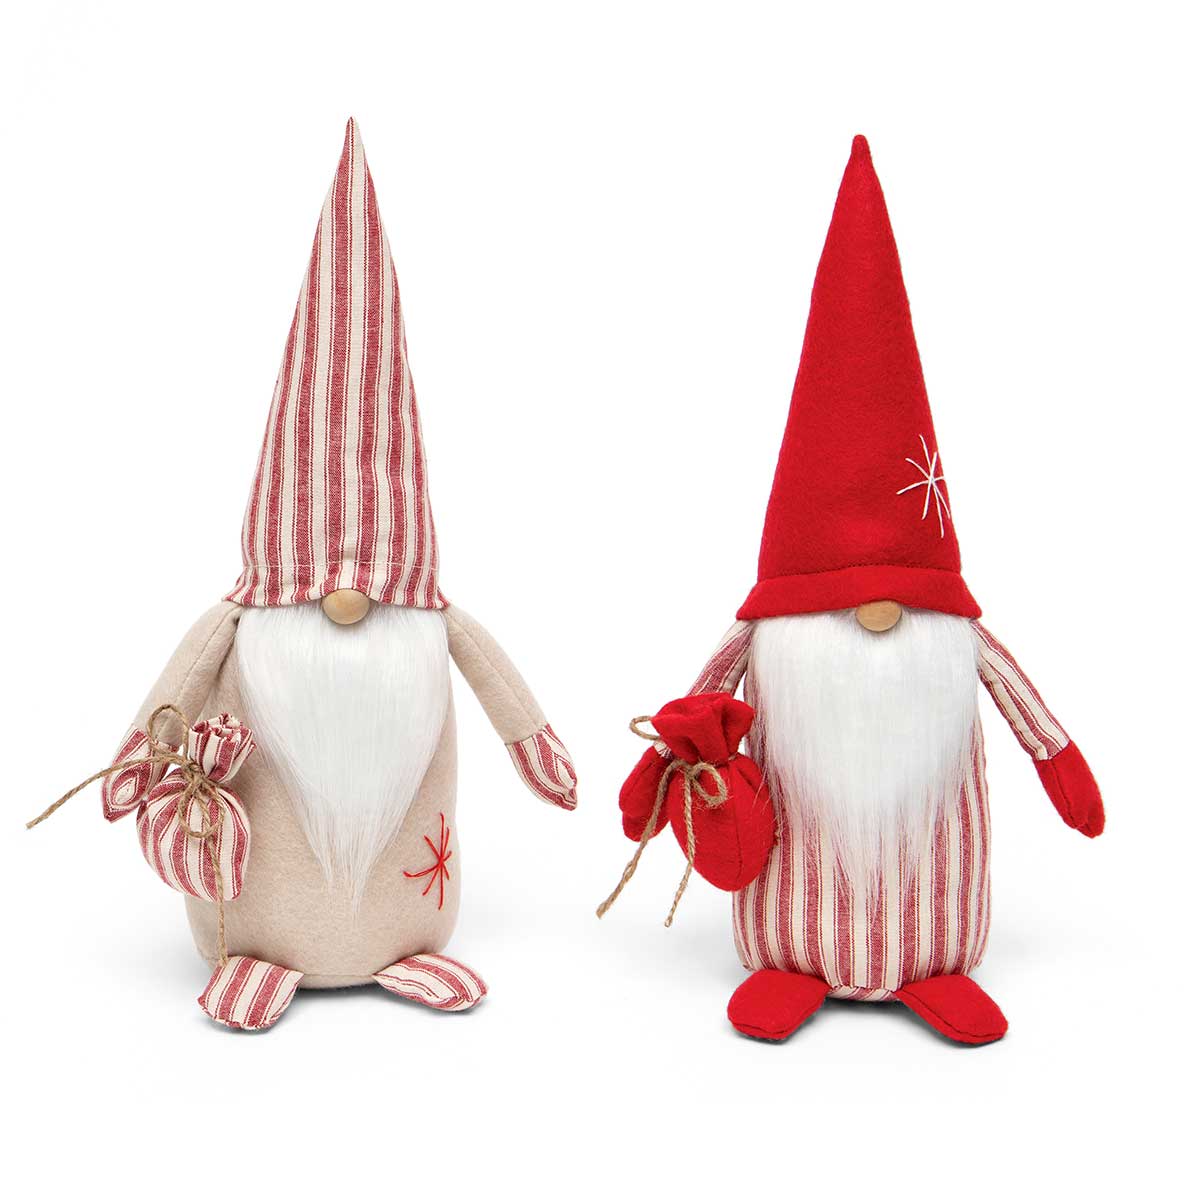 b50 GNOME TICKING BAG 2ASSORTE 5IN X 4.5IN X 12.5IN POLYESTER